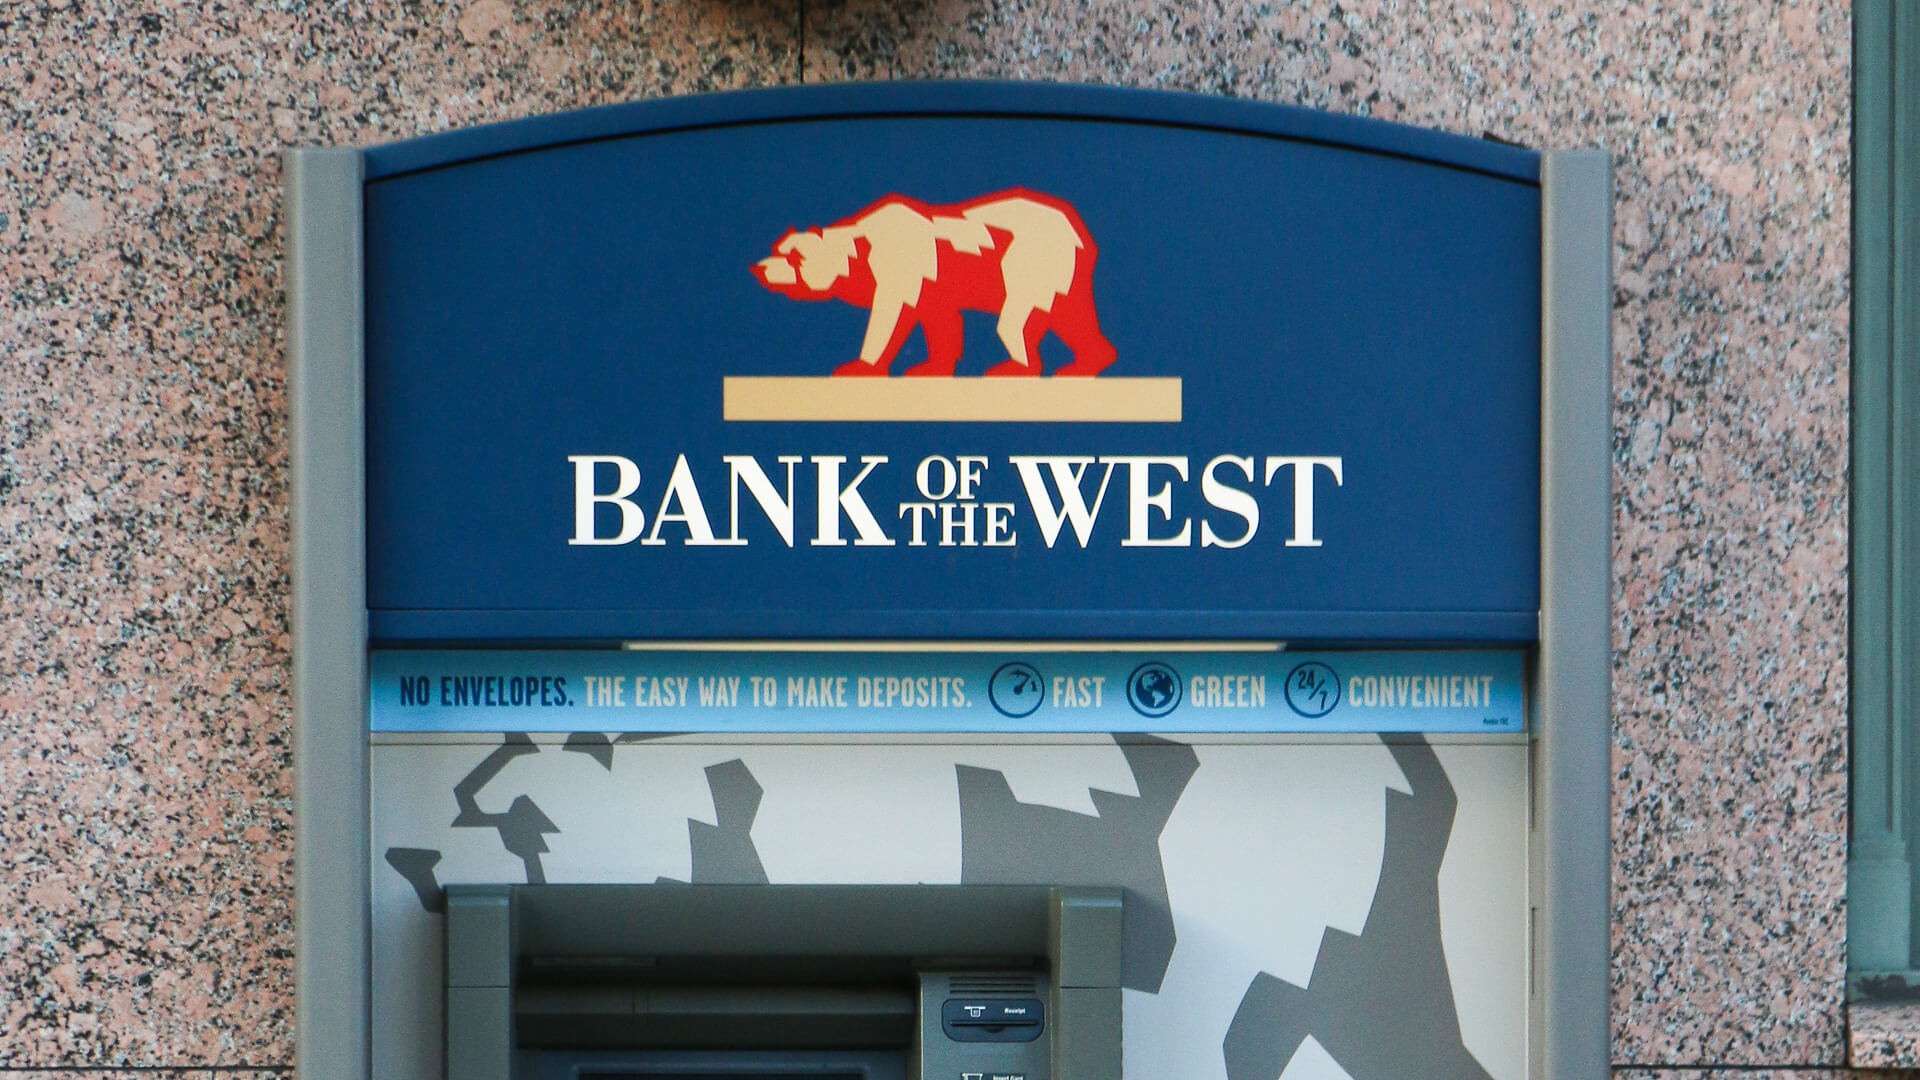 BANK OF WEST